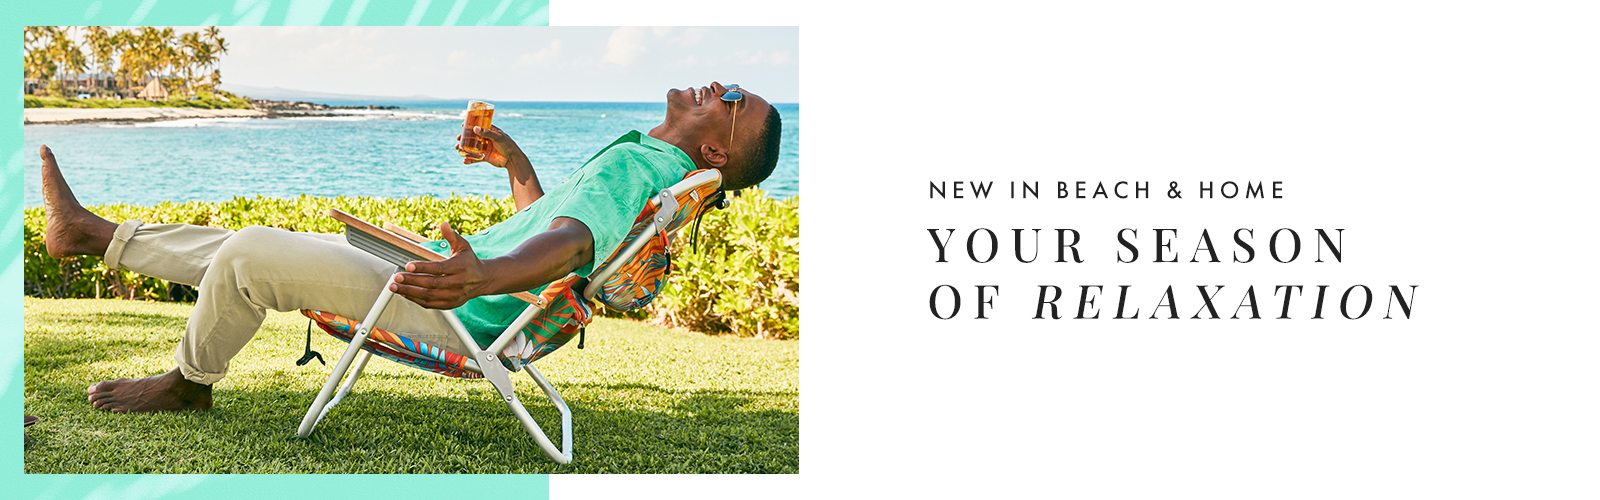 New In Beach & Home - Your Season Of Relaxation